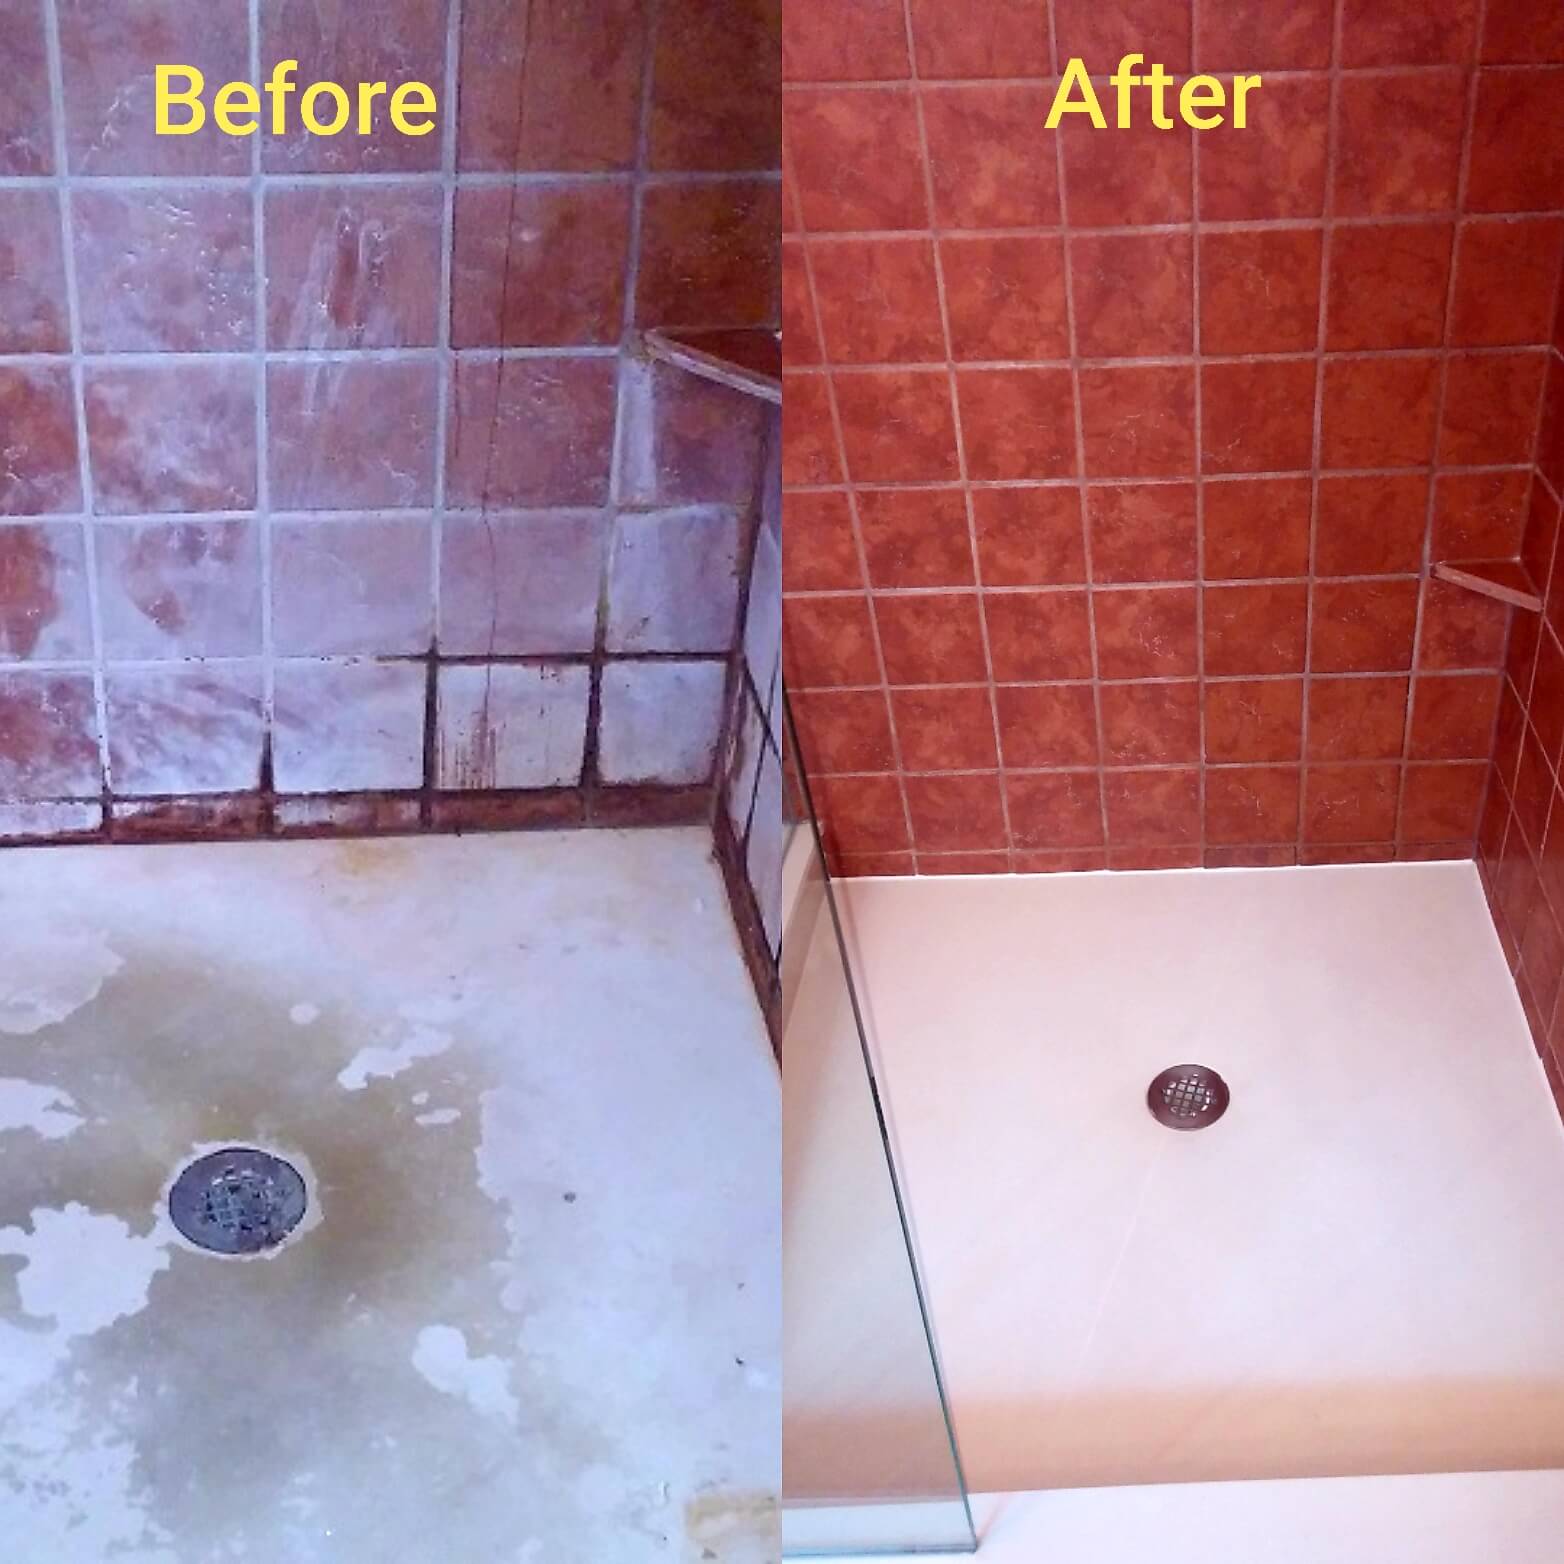 cleaned shower before and after pictures in Farmers Branch, Tx